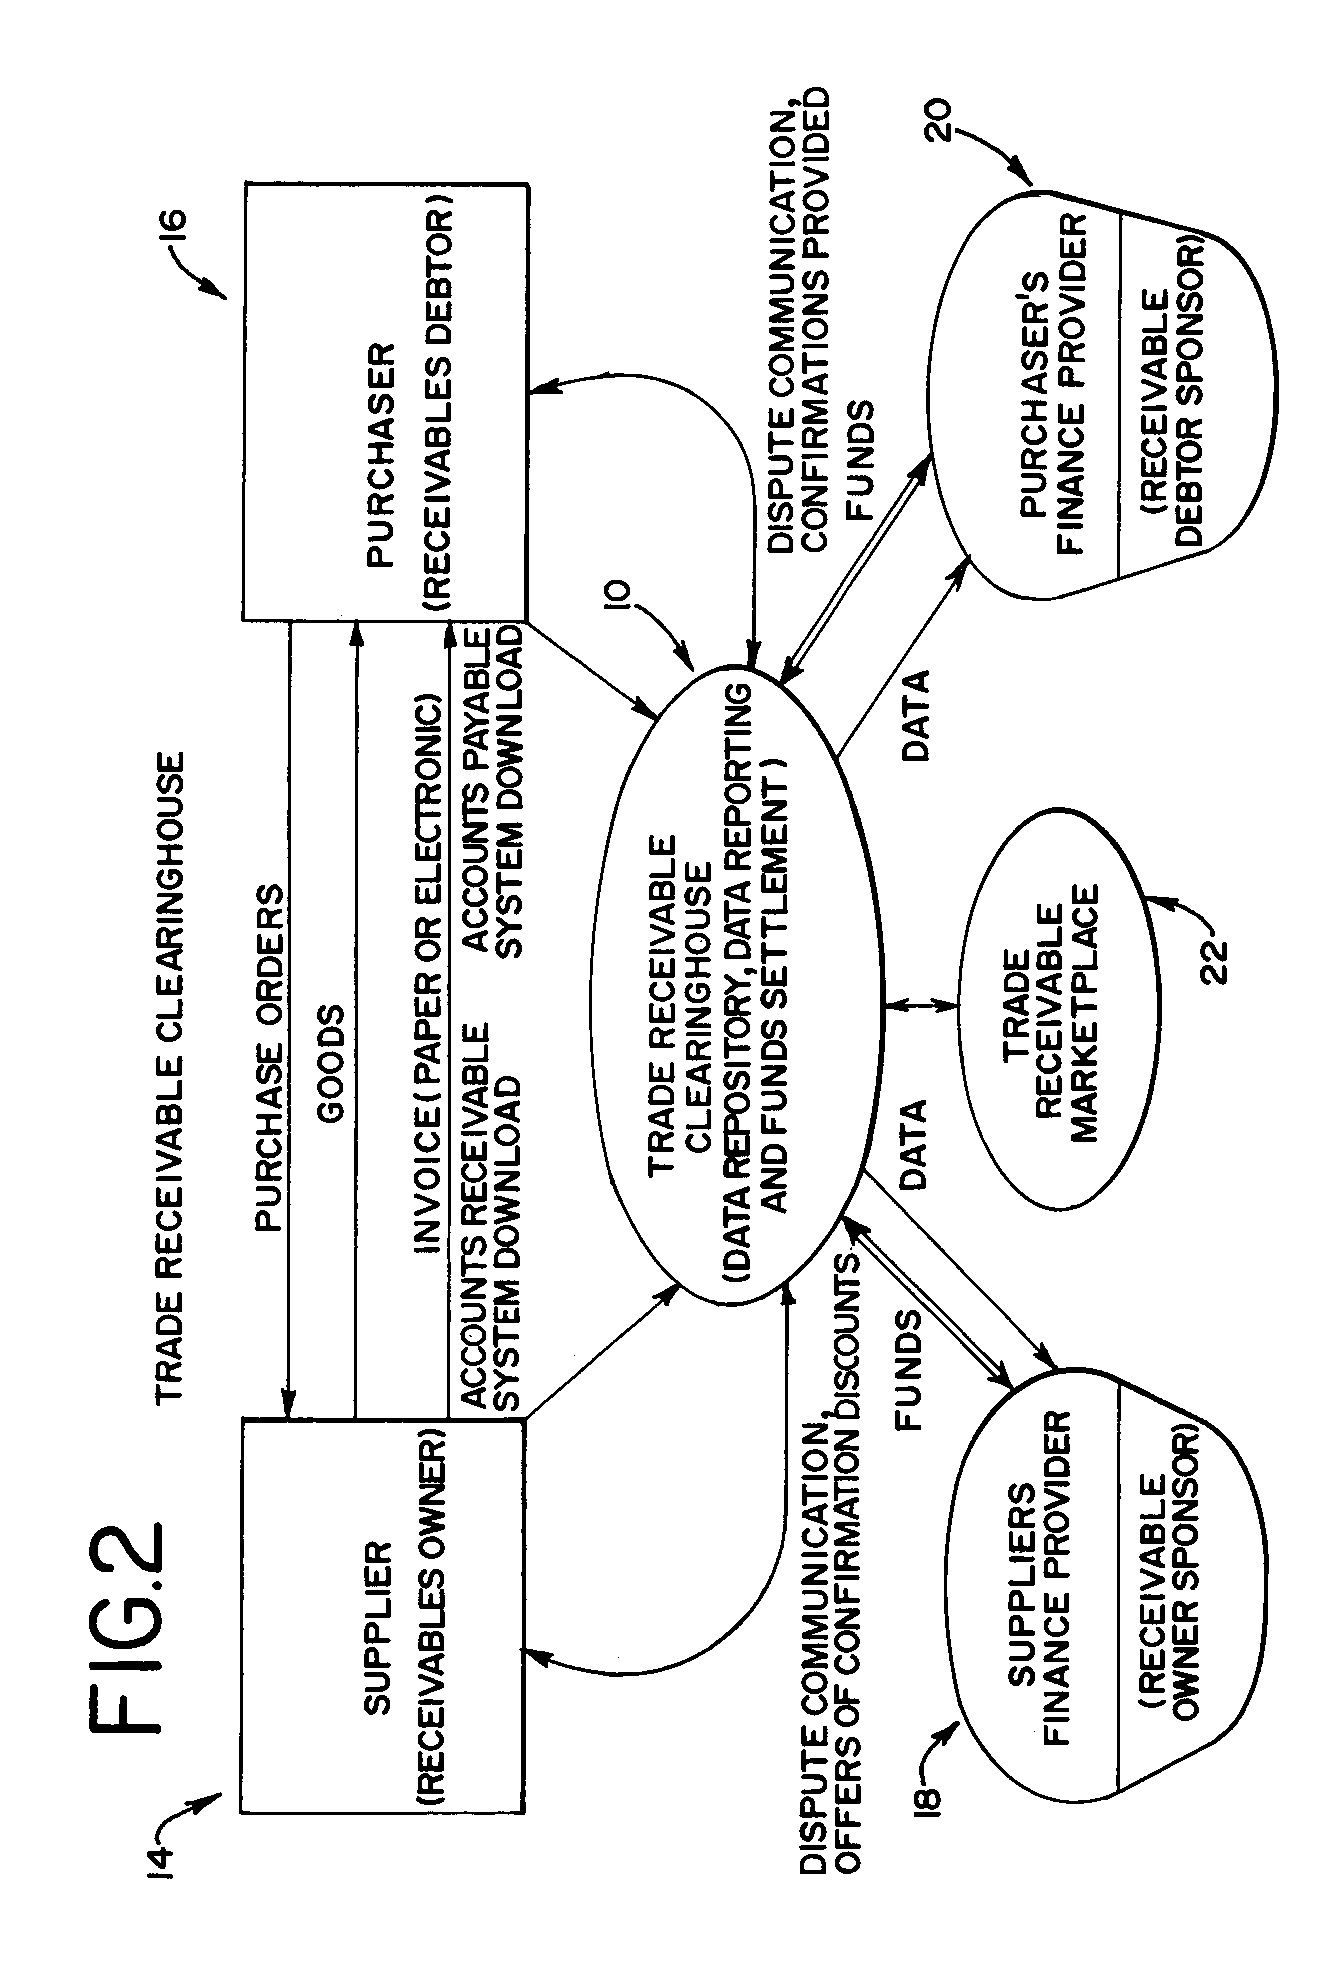 Trade receivable processing method and apparatus